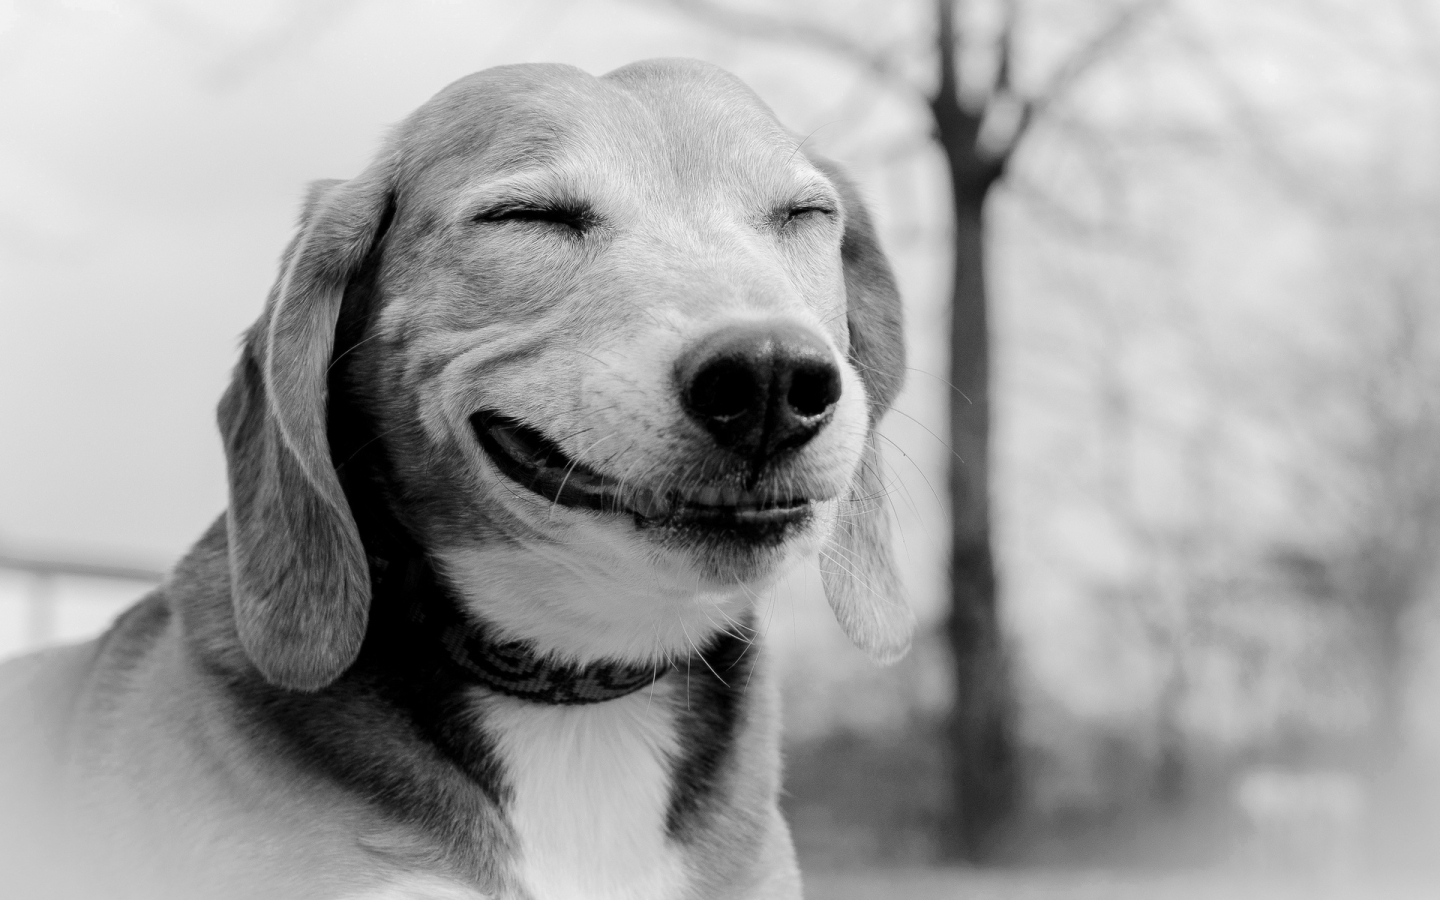 Smiling Dog for 1440 x 900 widescreen resolution